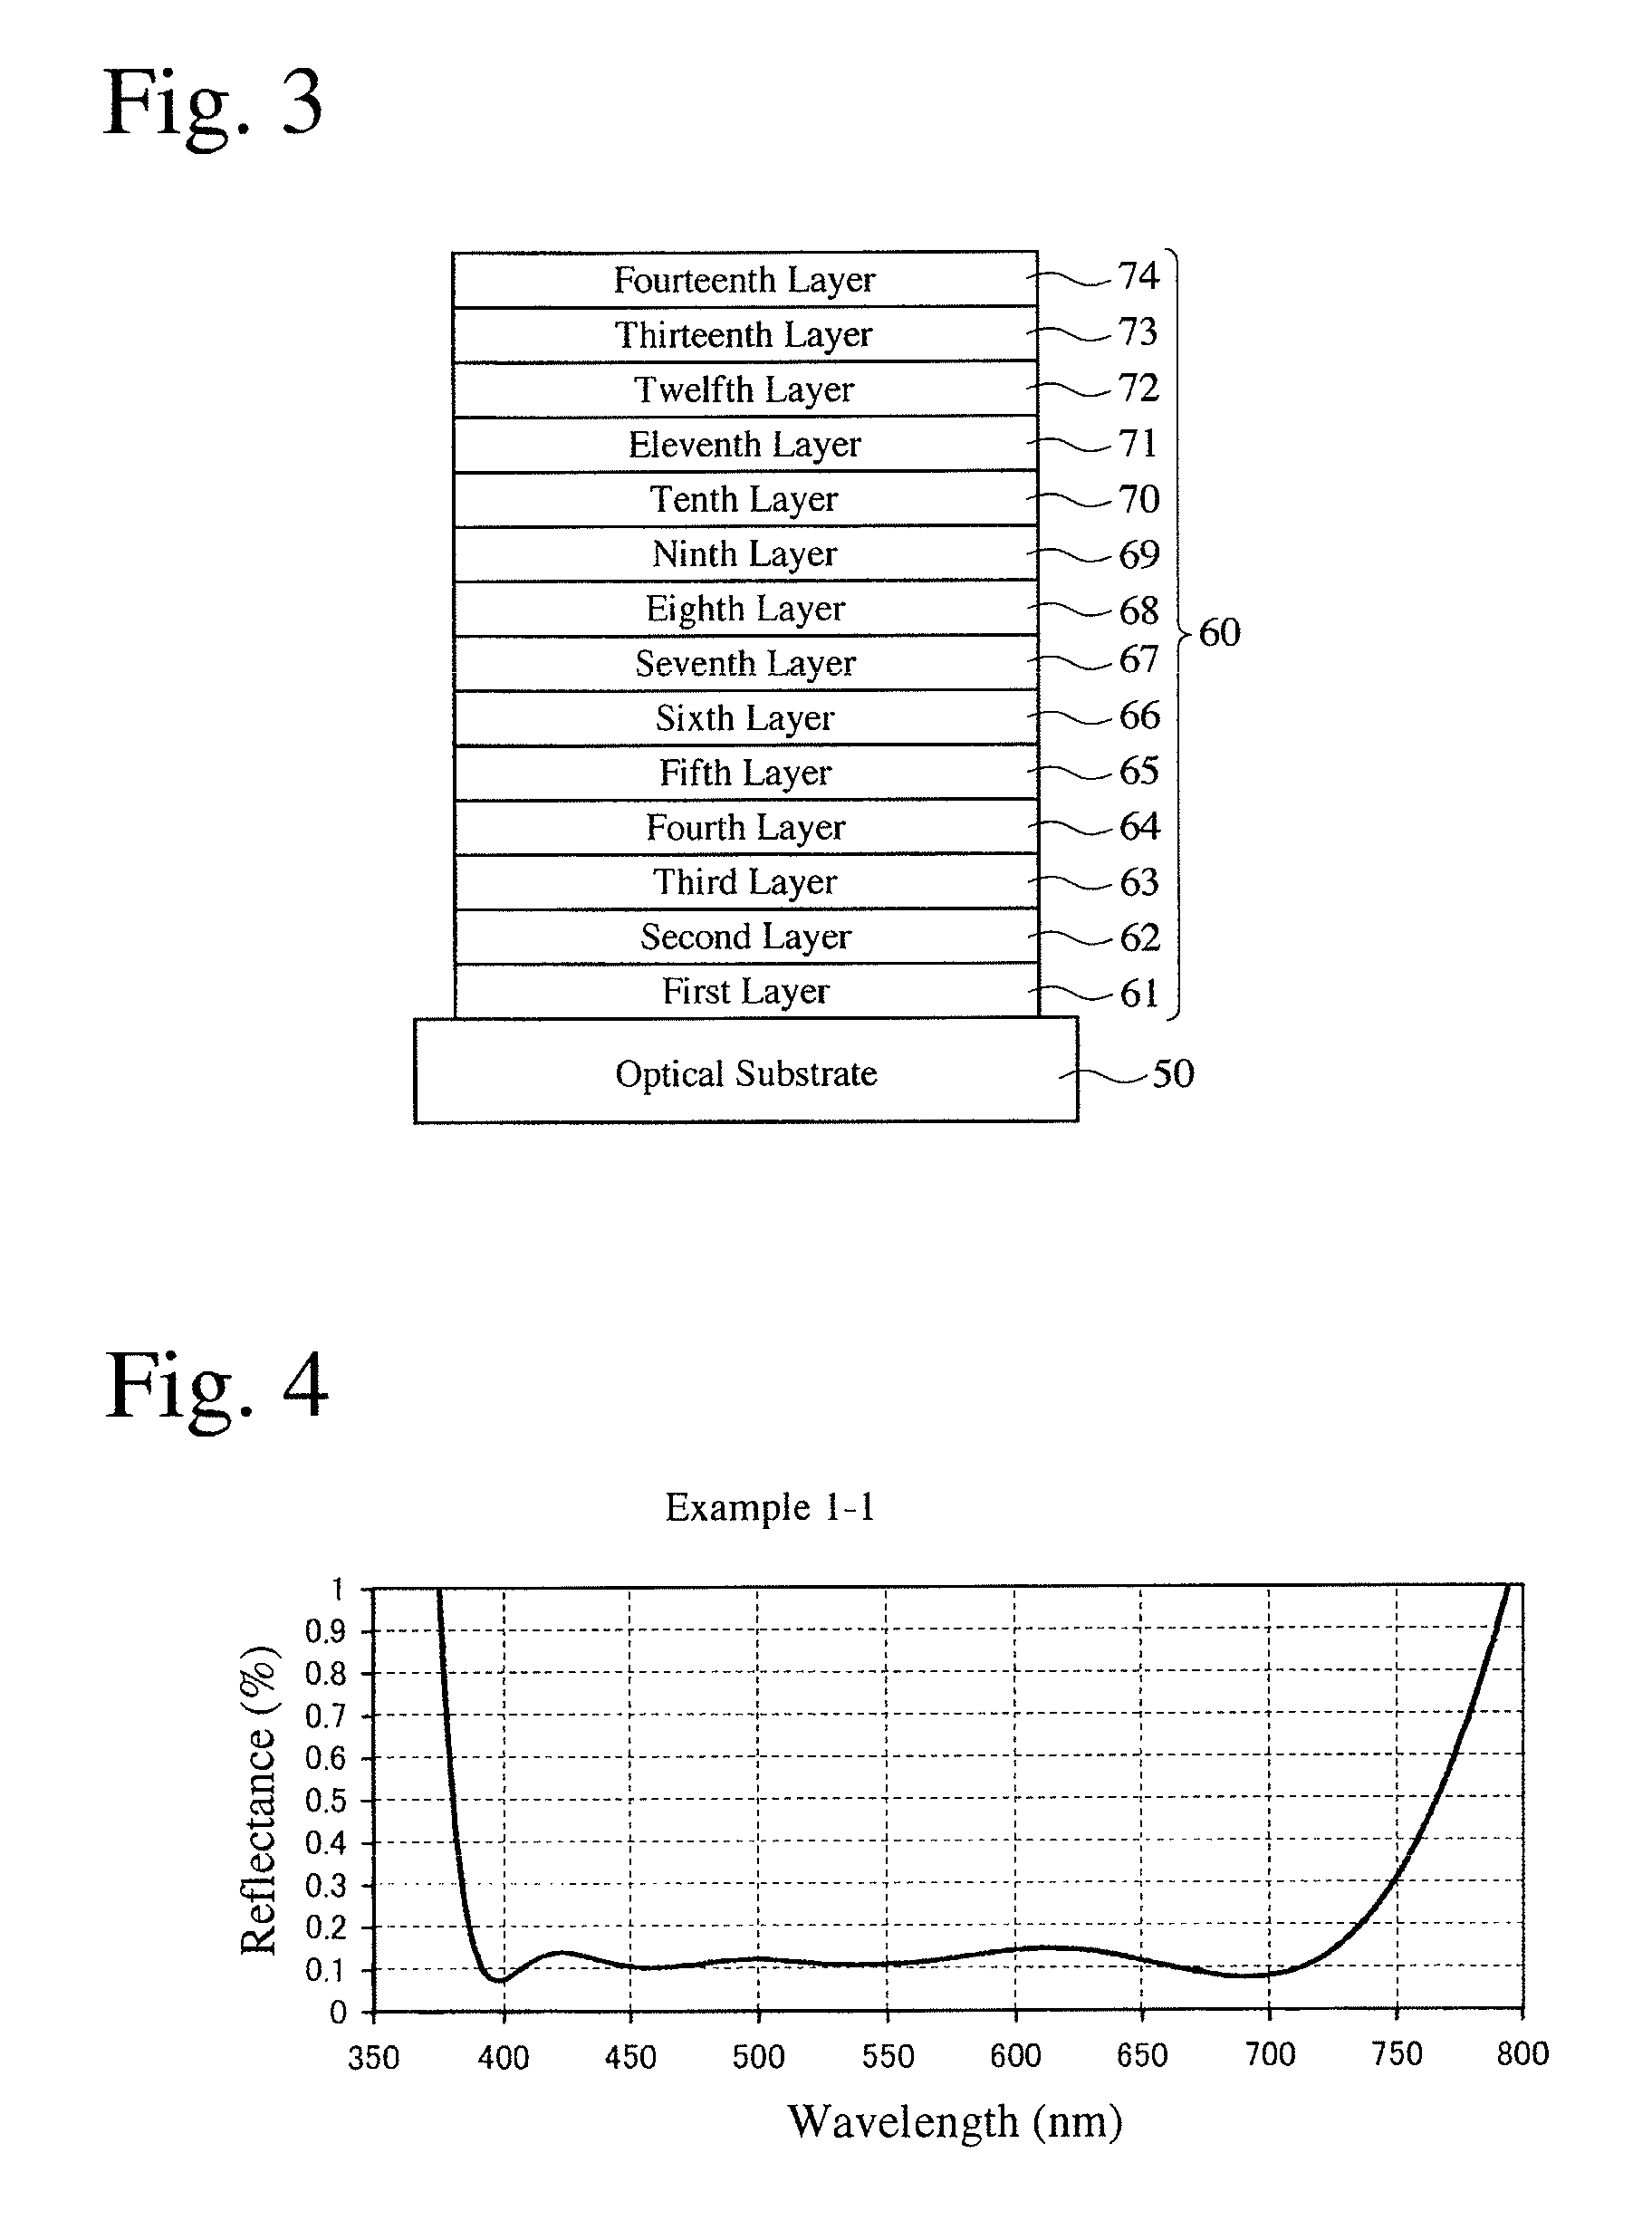 Anti-reflection coating, optical member having it, and optical equipment comprising such optical member